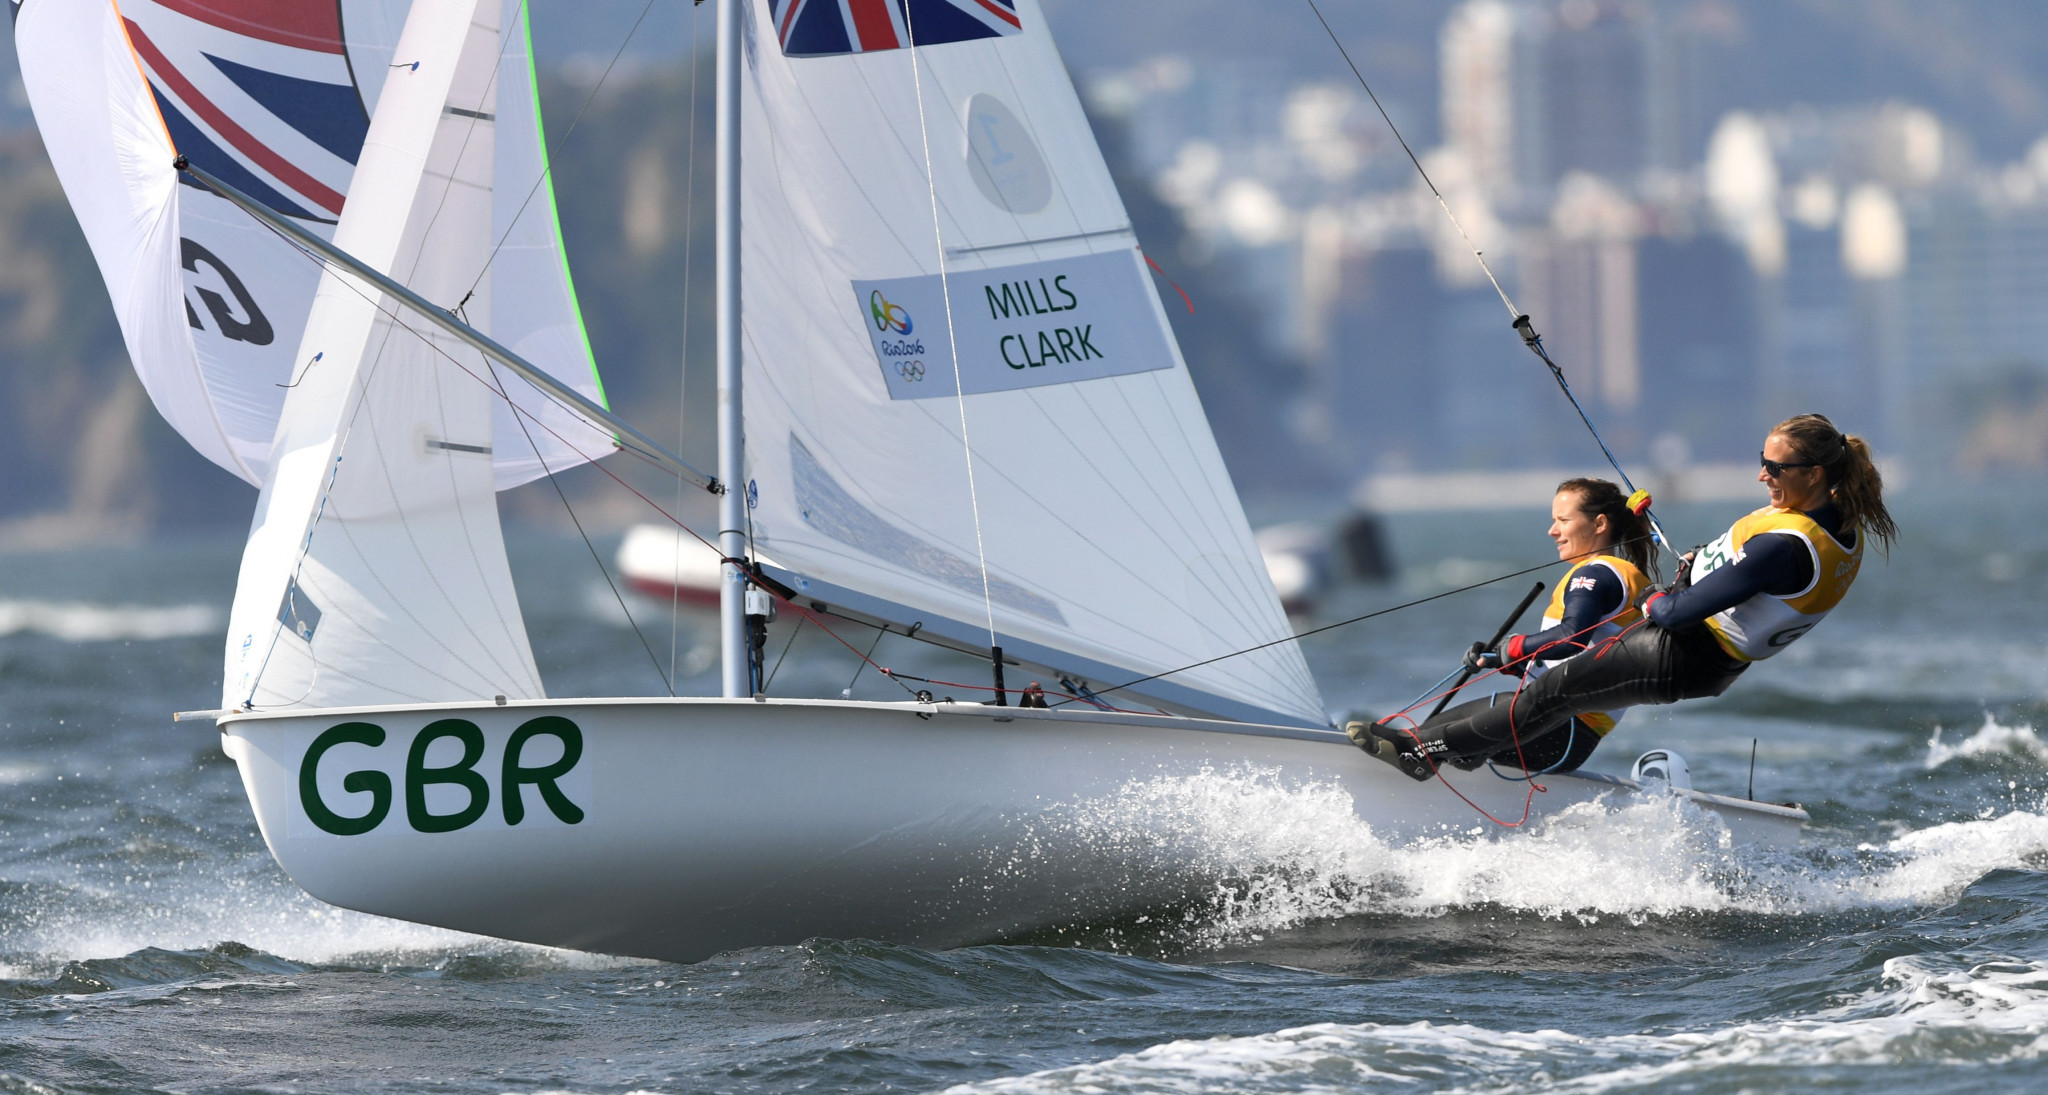 Fifteen sailors have been selected by the British Olympic Association for Tokyo 2020 ©Getty Images